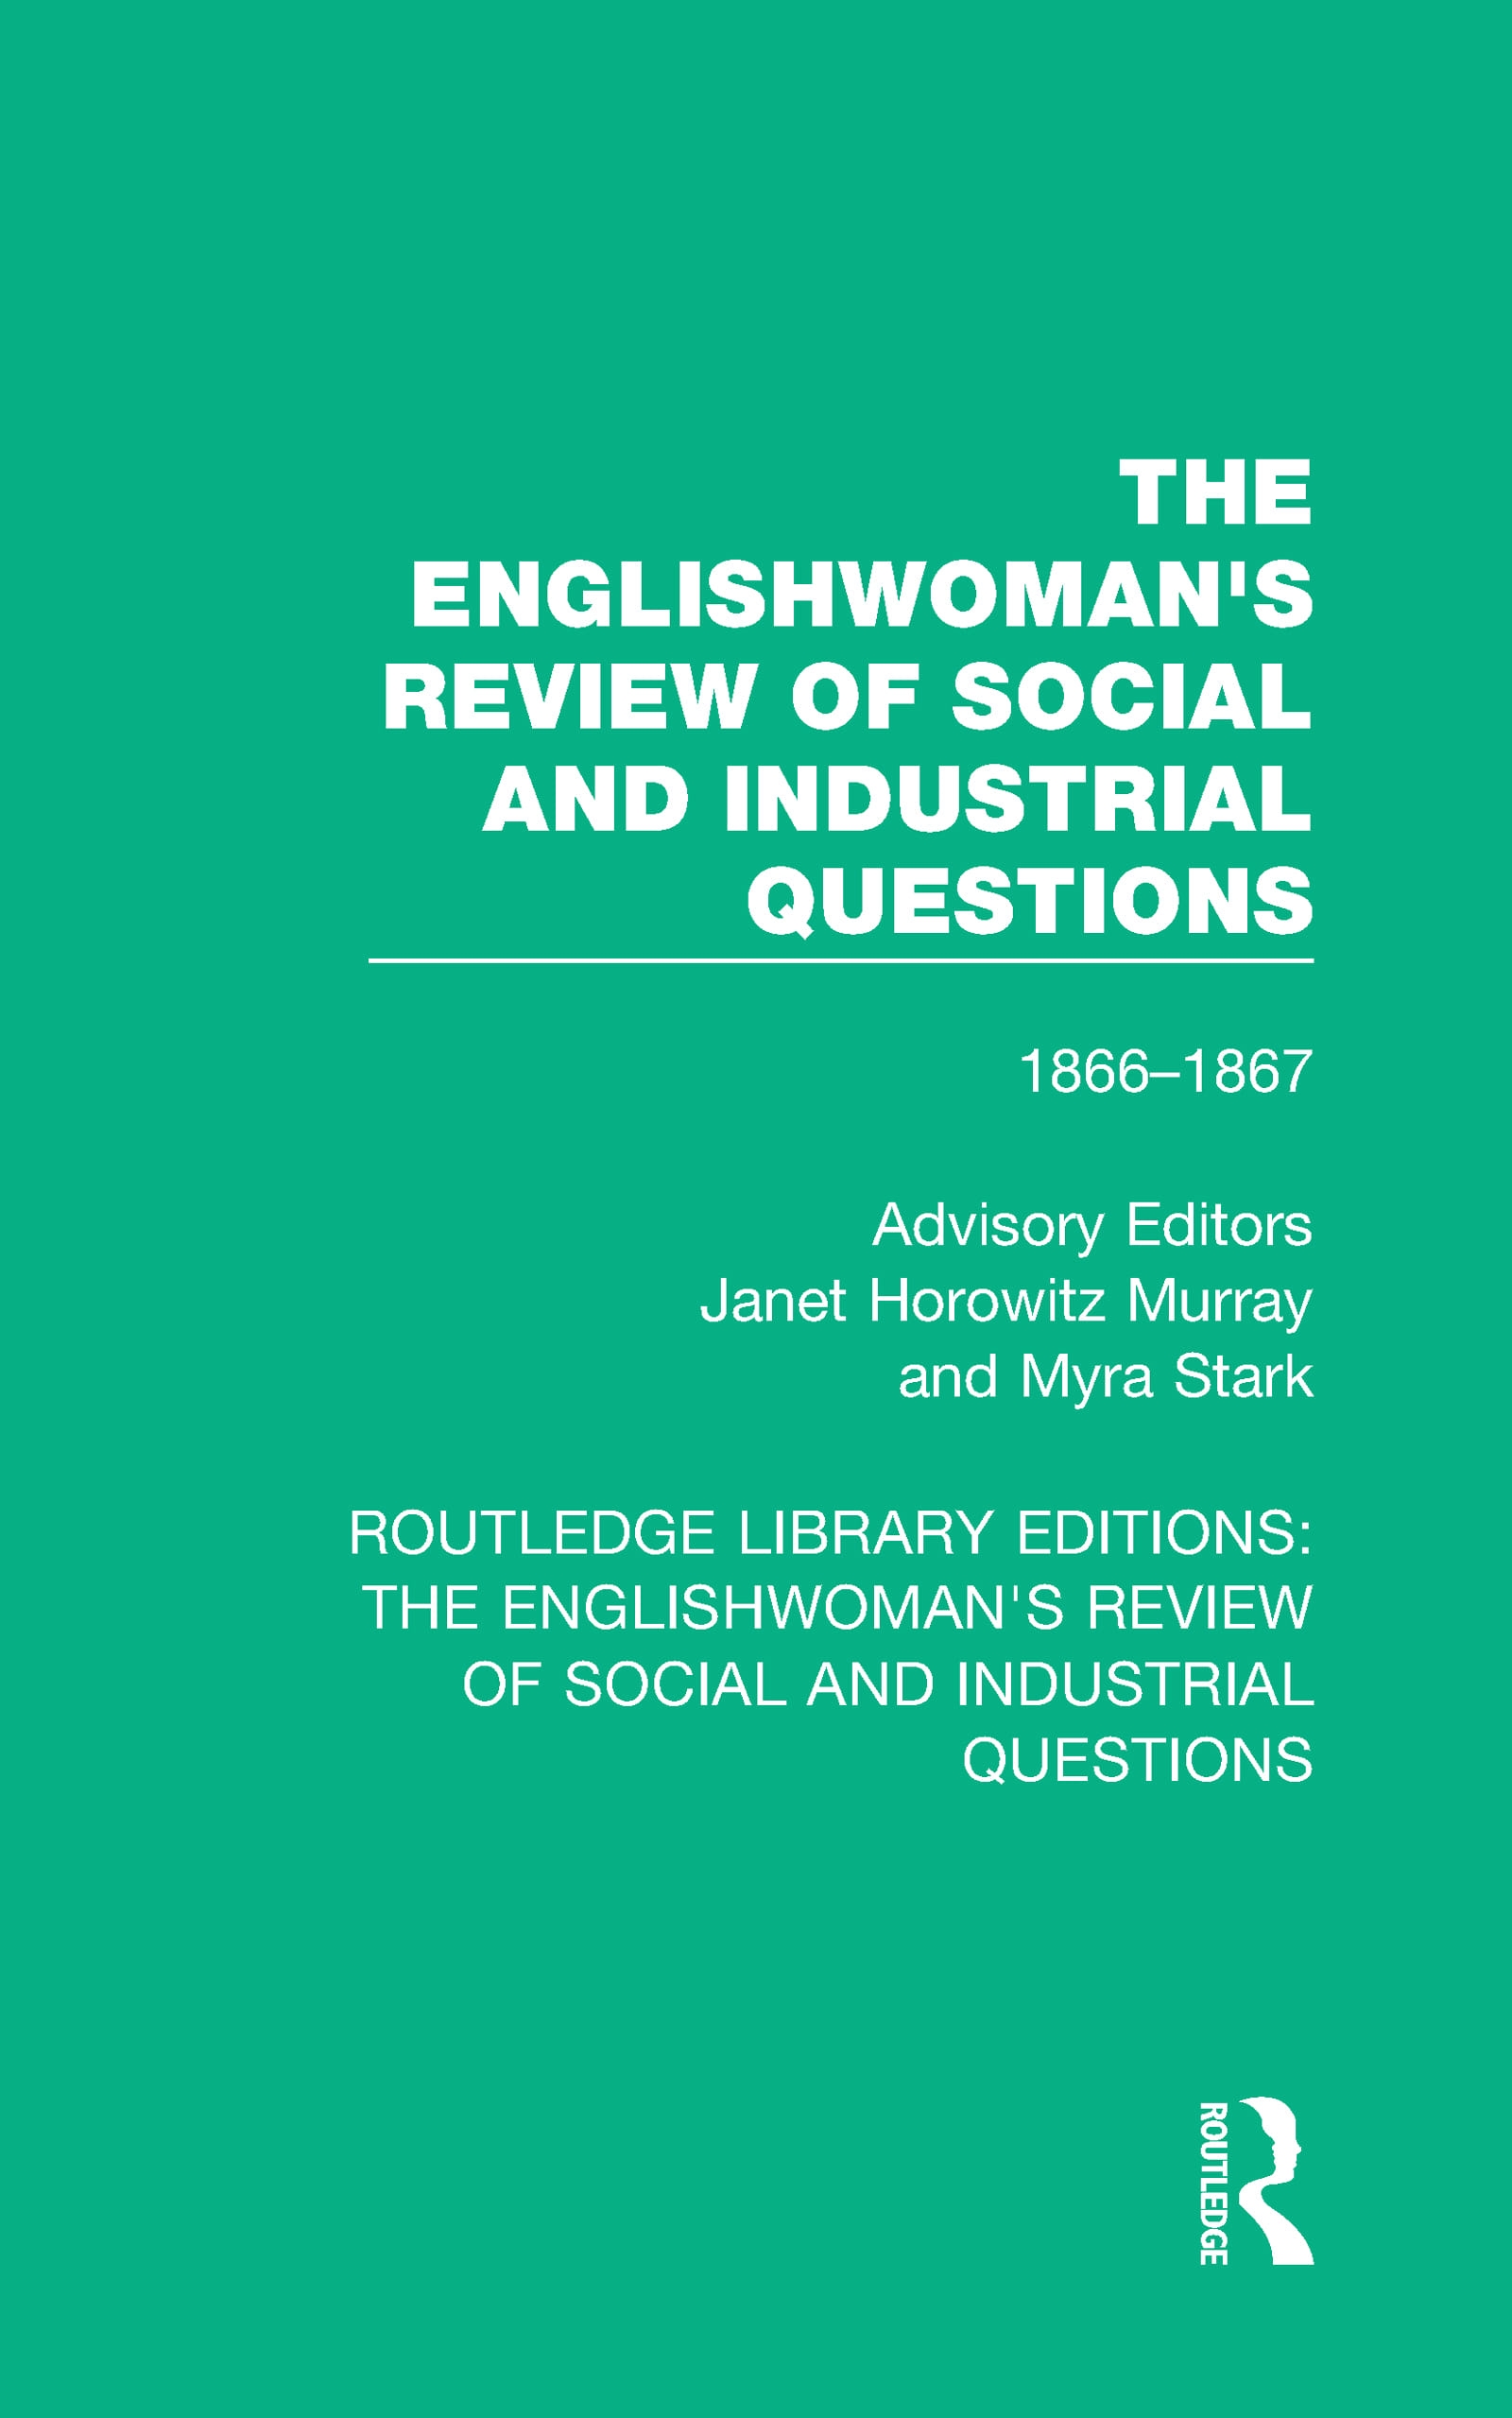 The Englishwoman’’s Review of Social and Industrial Questions: 1866-1867 with an Introduction by Janet Horowitz Murray and Myra Stark